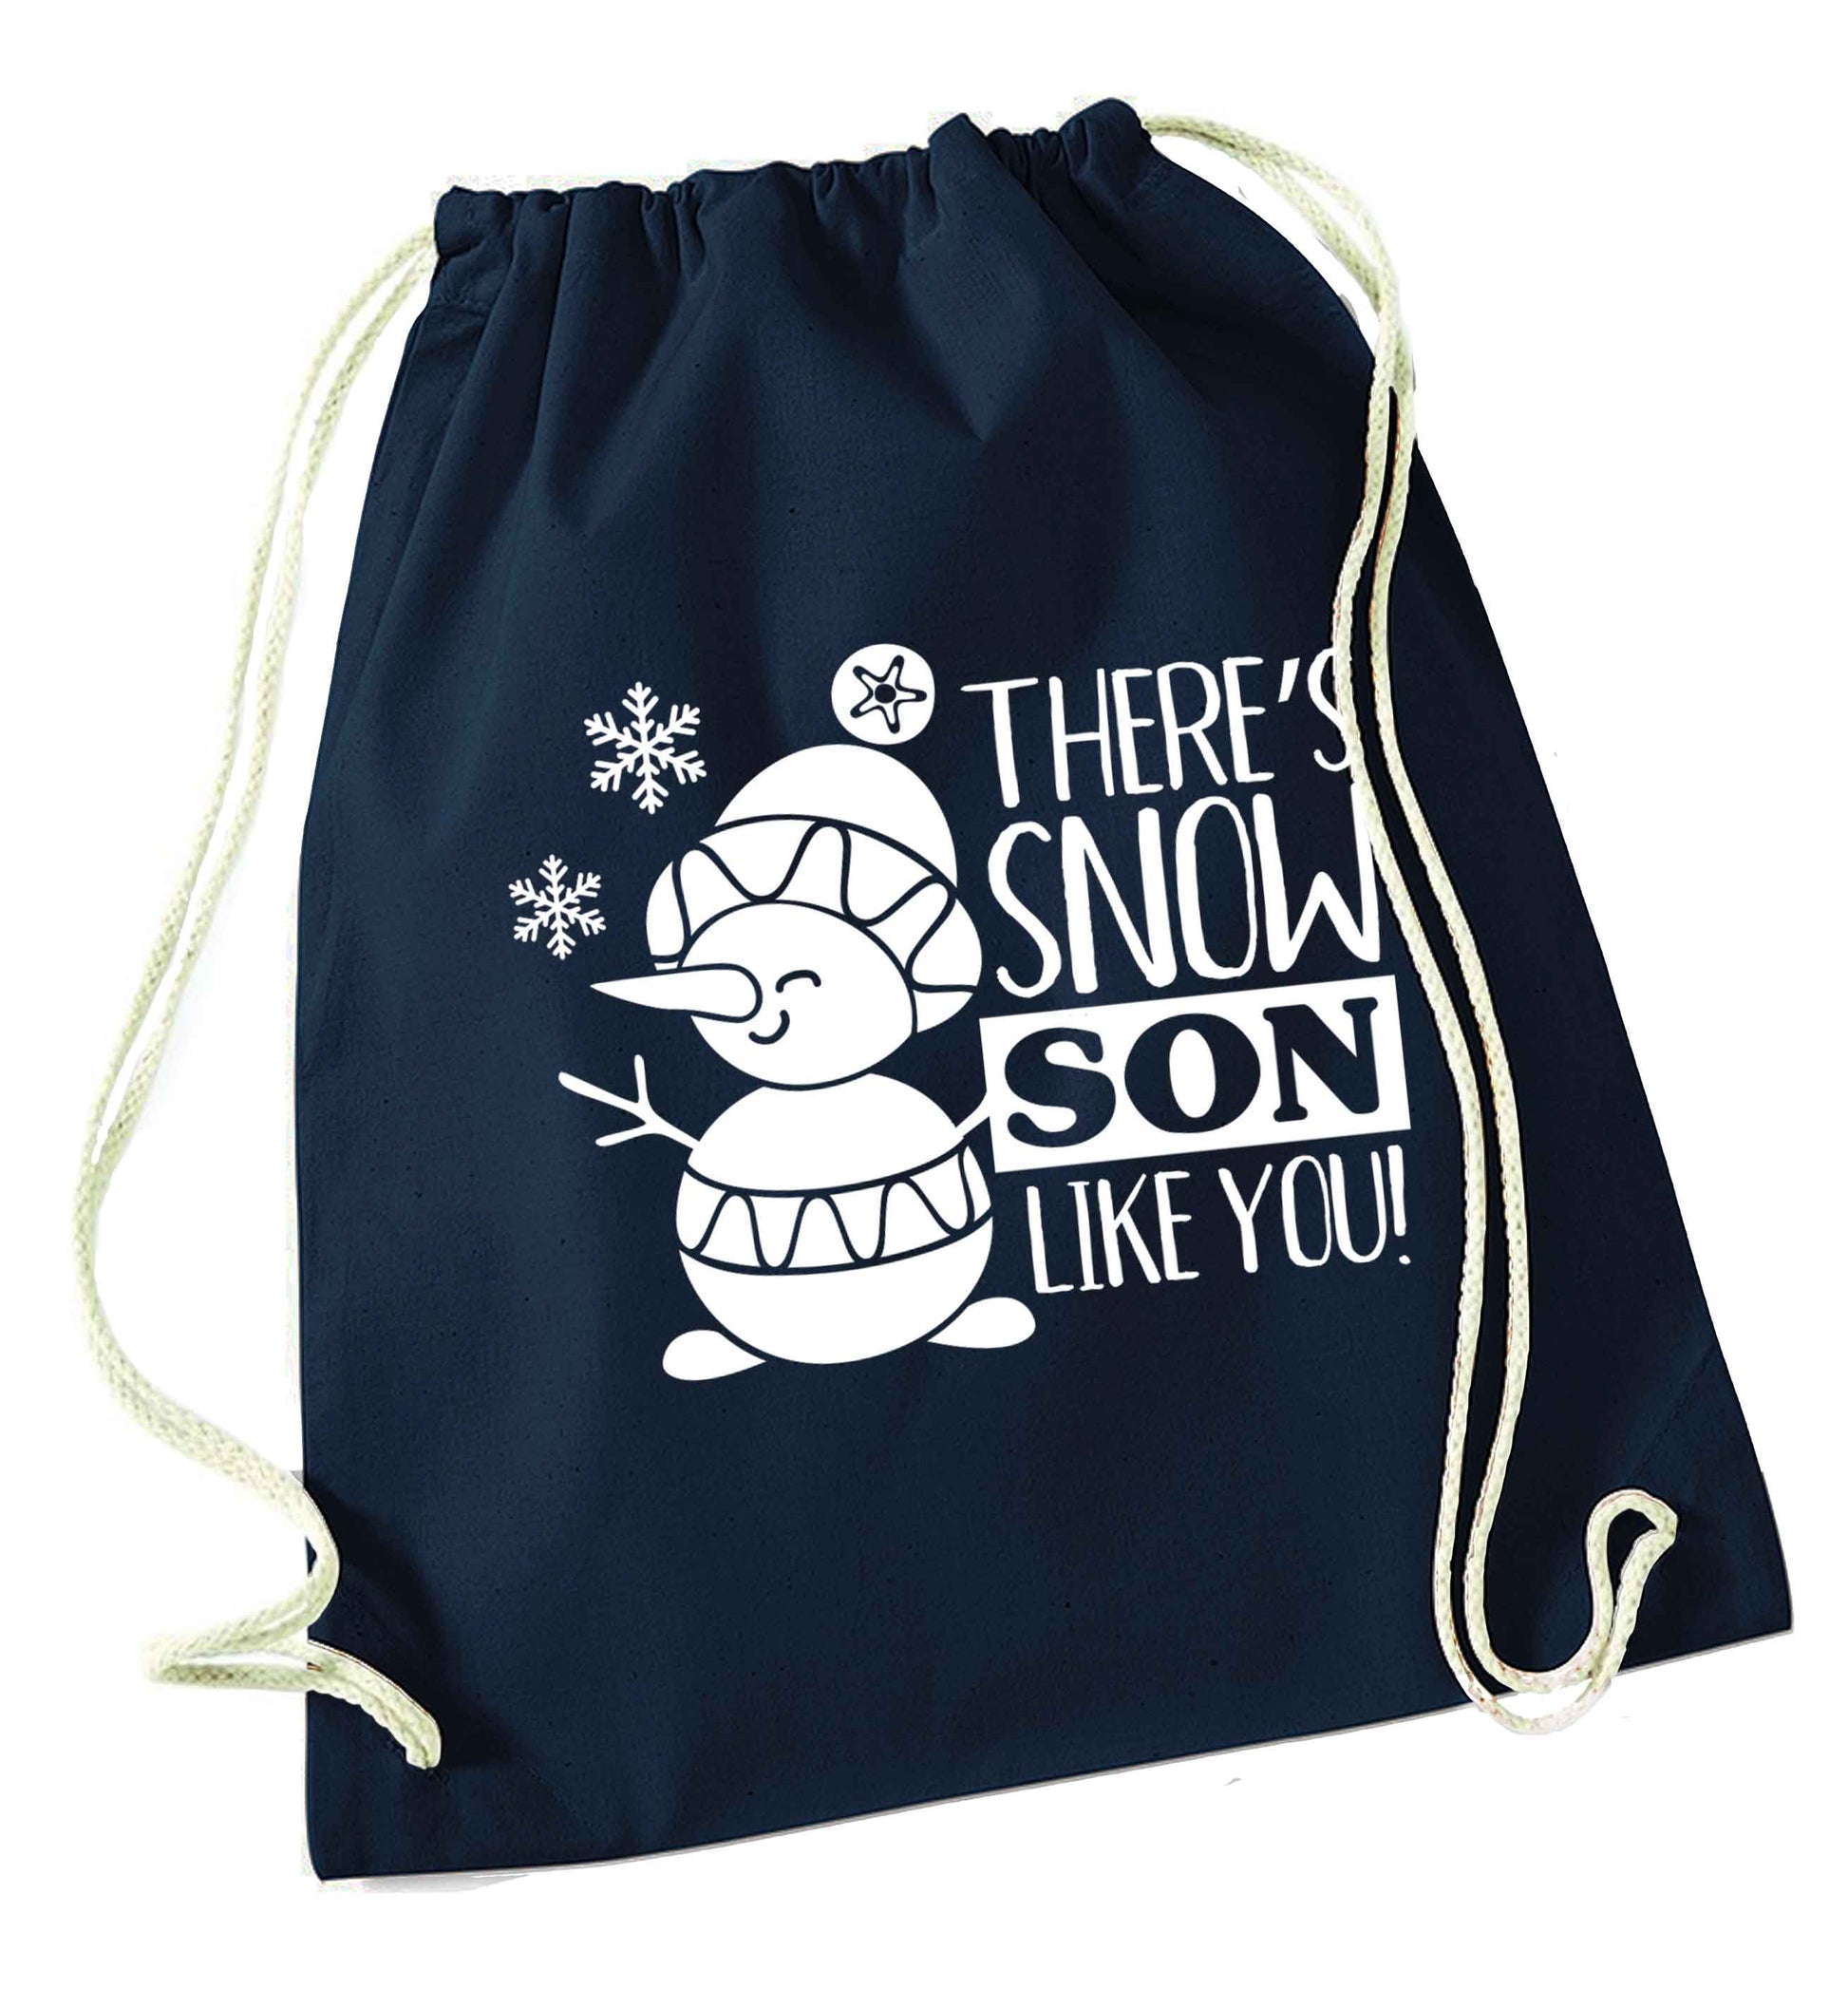 There's snow son like you navy drawstring bag